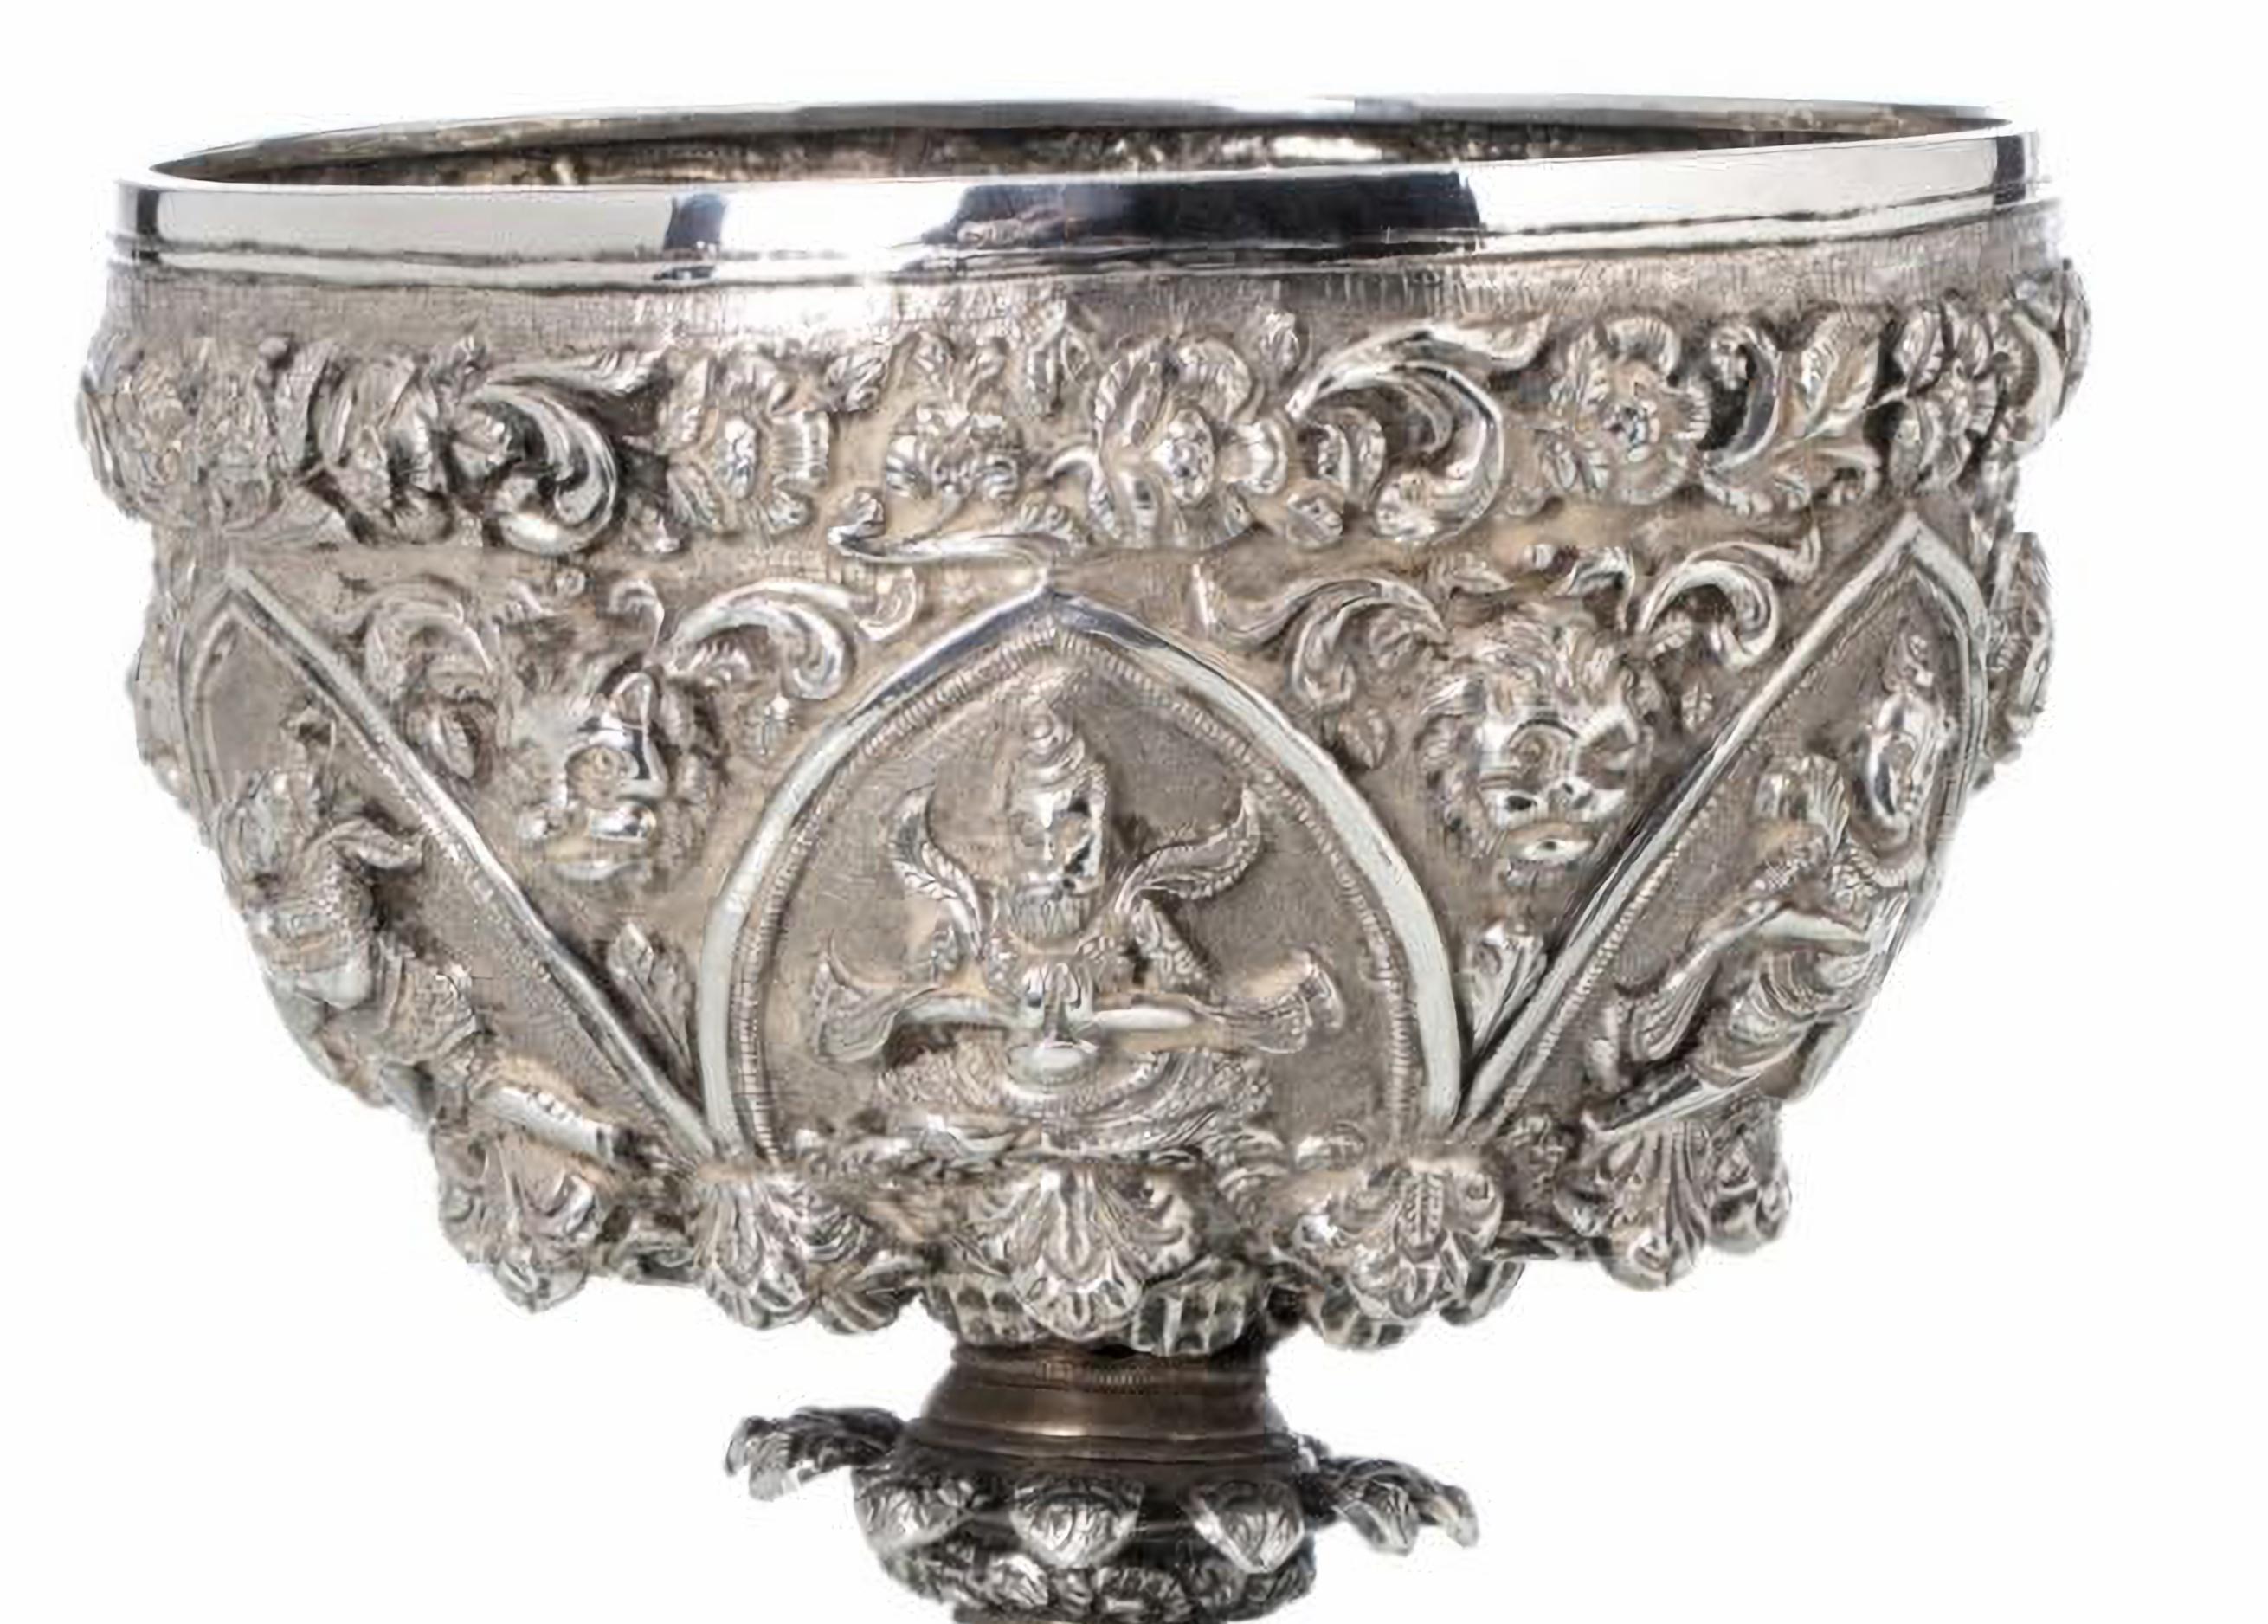 Saudi Arabian RARE SILVER BOWL Middle East 19th Century Ceremony Cup For Sale